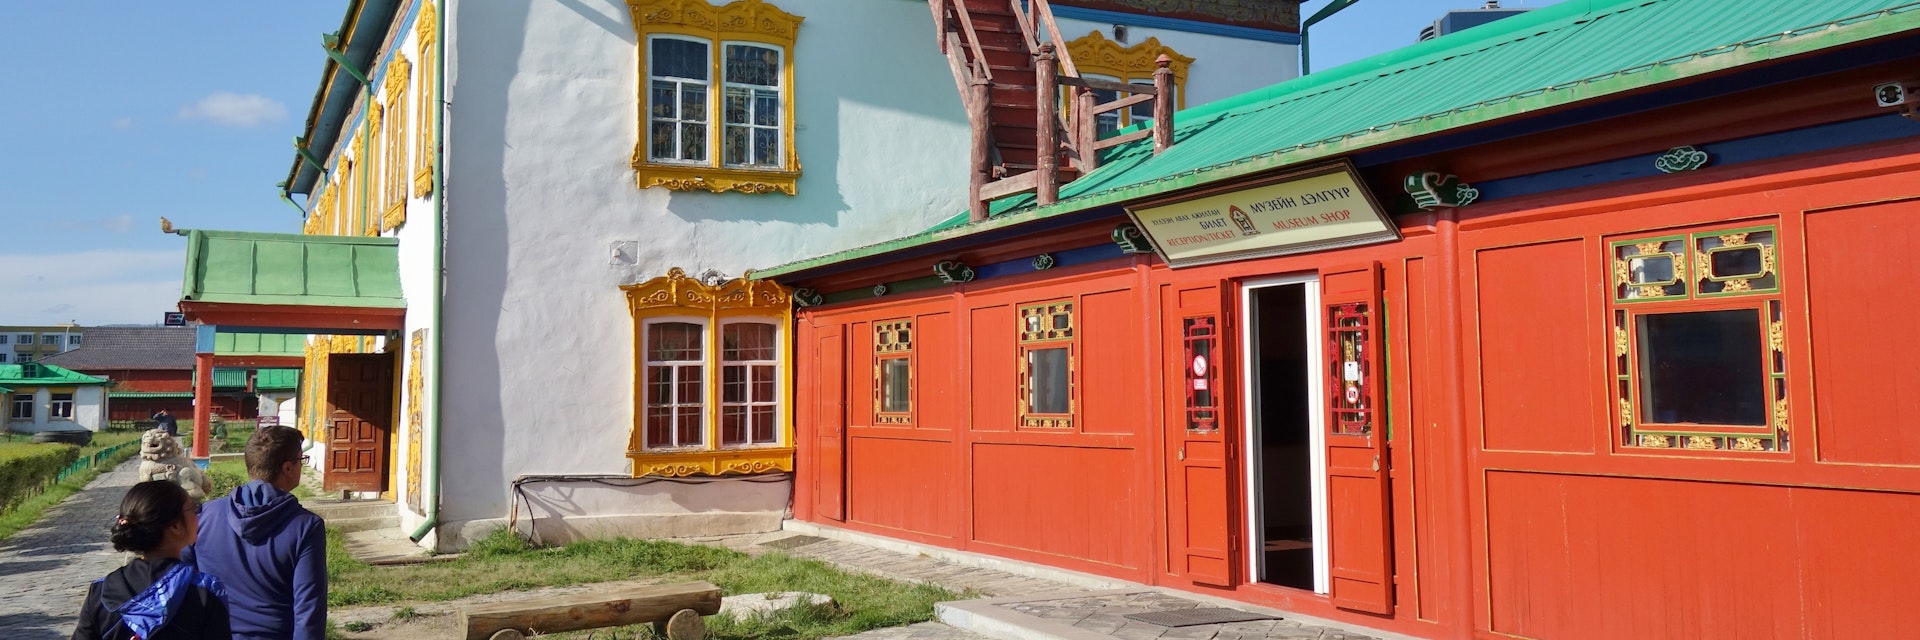 View of the Winter Palace of the Bogd Khan, now a museum, located in southern Ulaanbaatar, Mongolia.